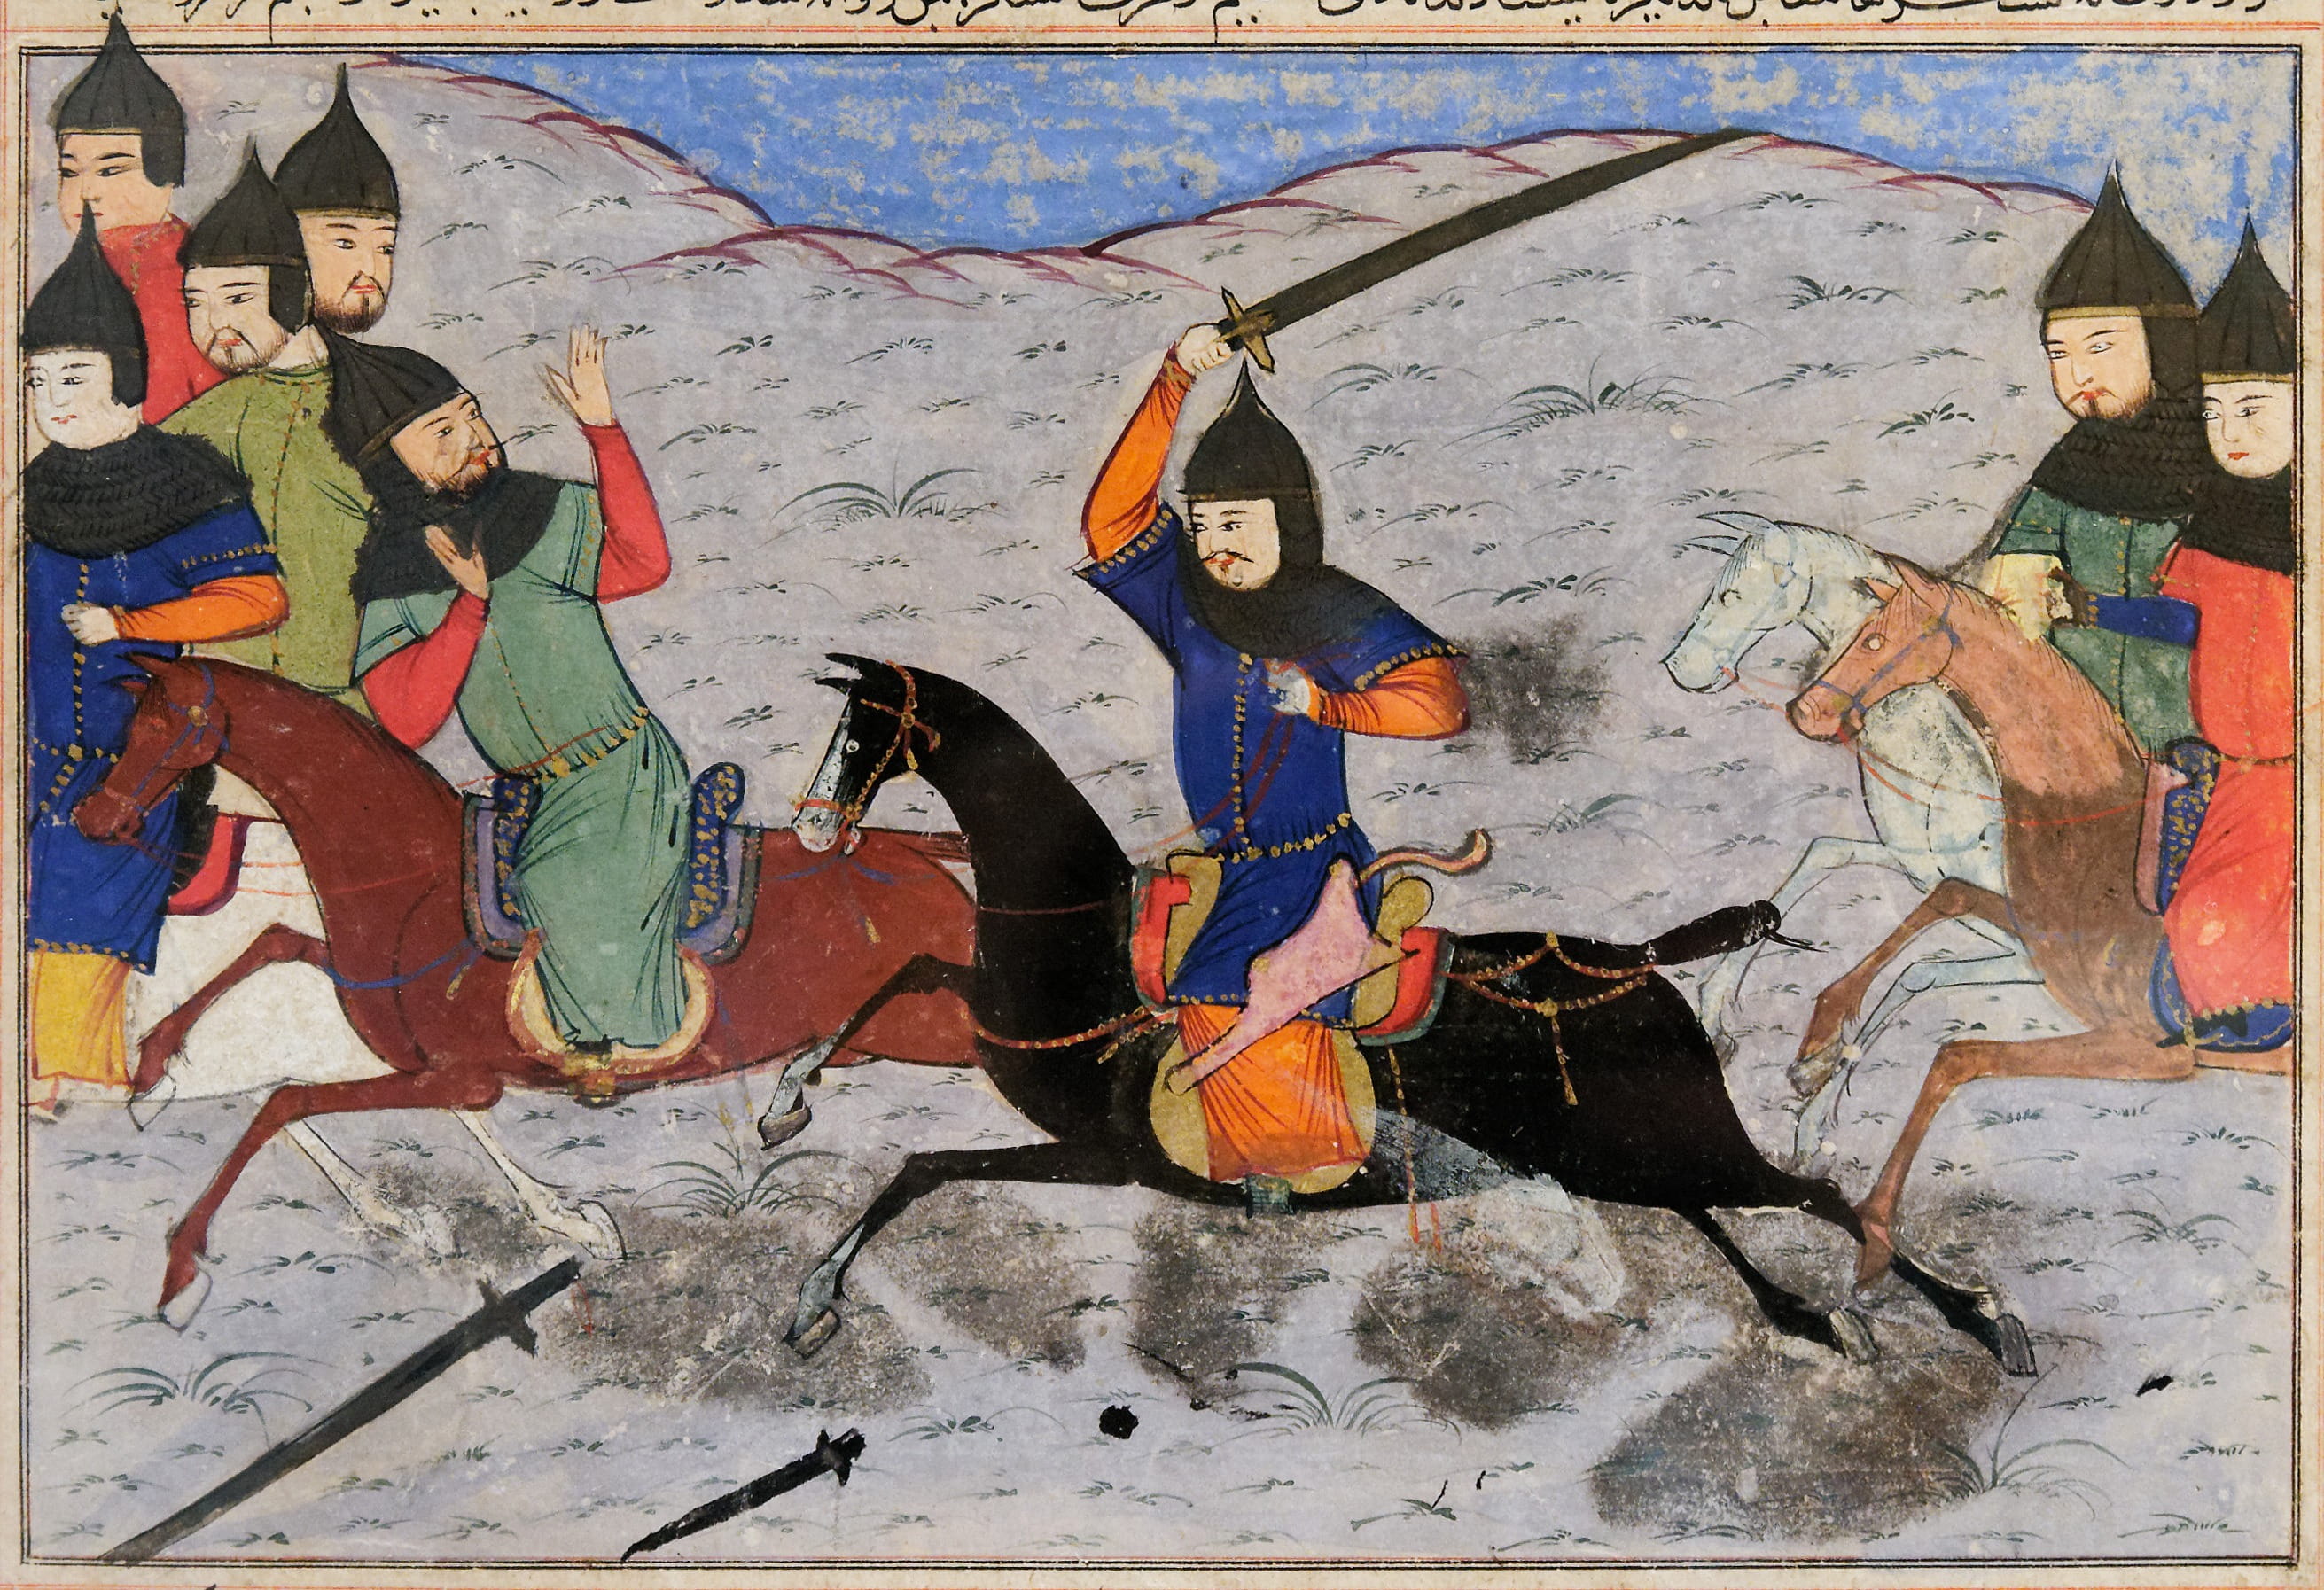 man holding sword while riding horse art work, Middle Ages, Sword Fighting